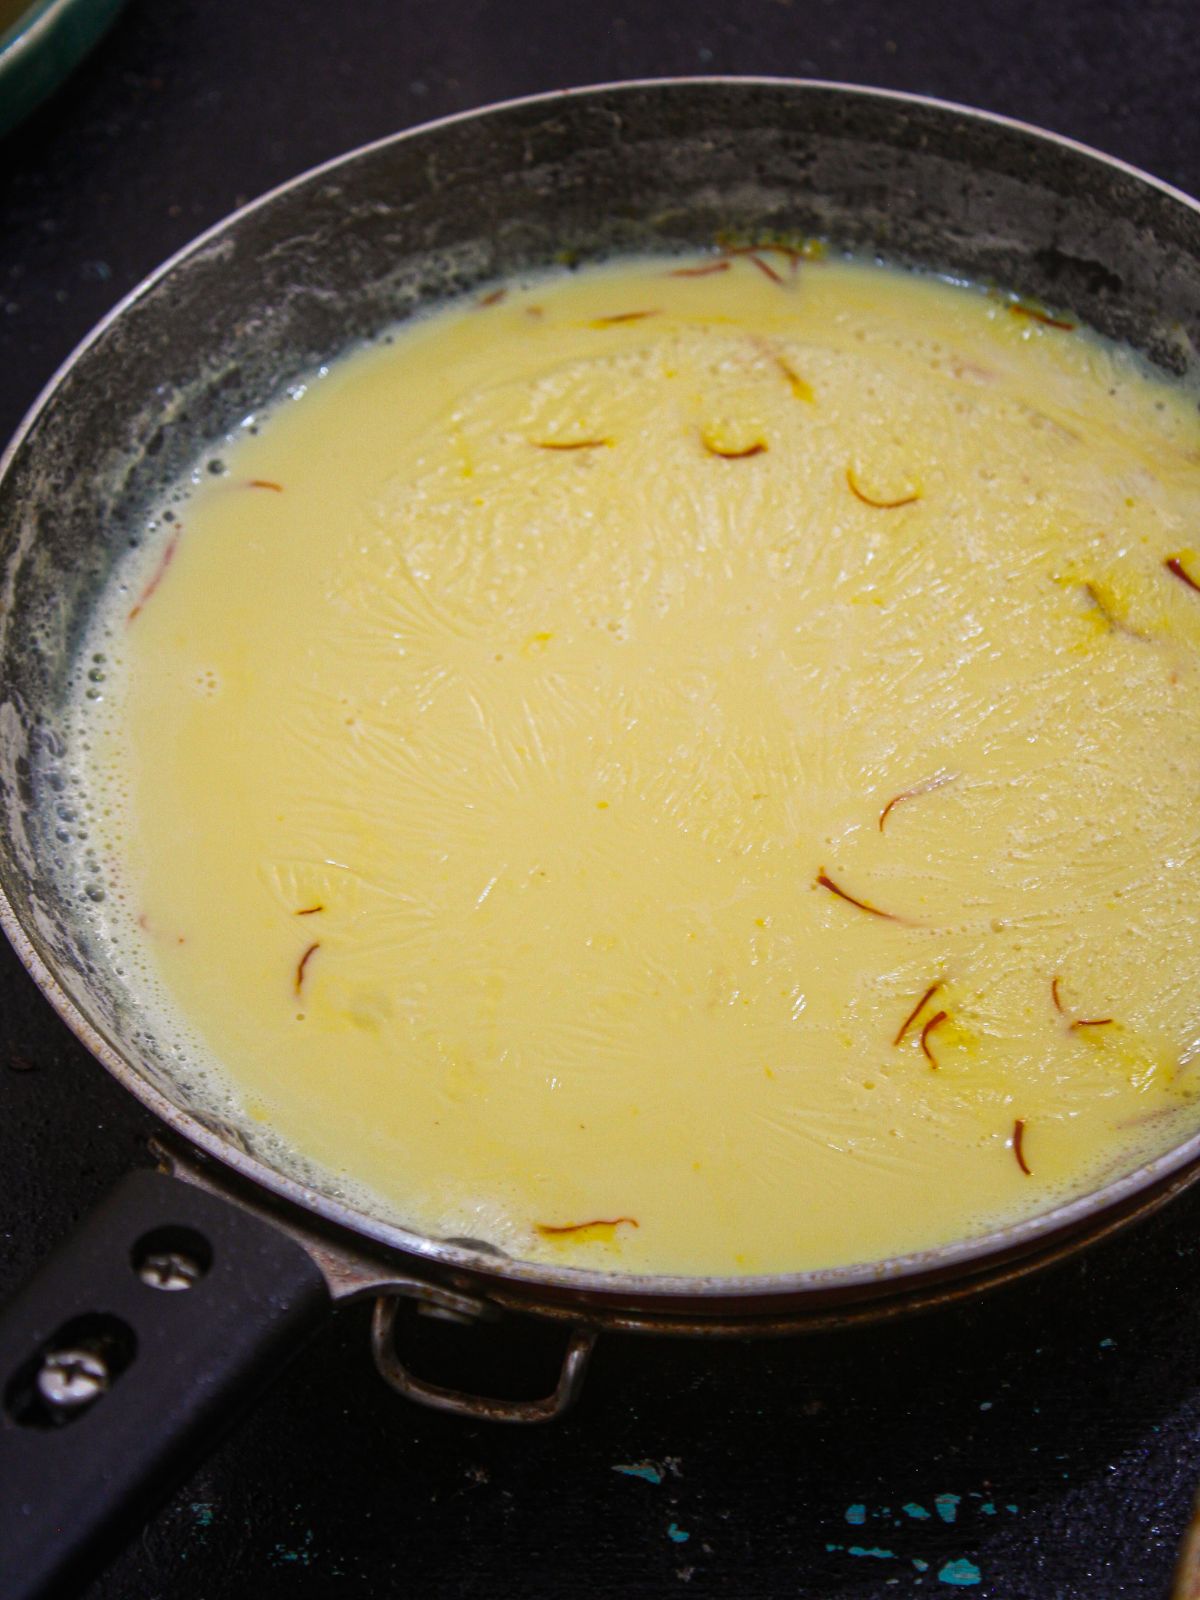 Boil the milk and add saffron and rose water.